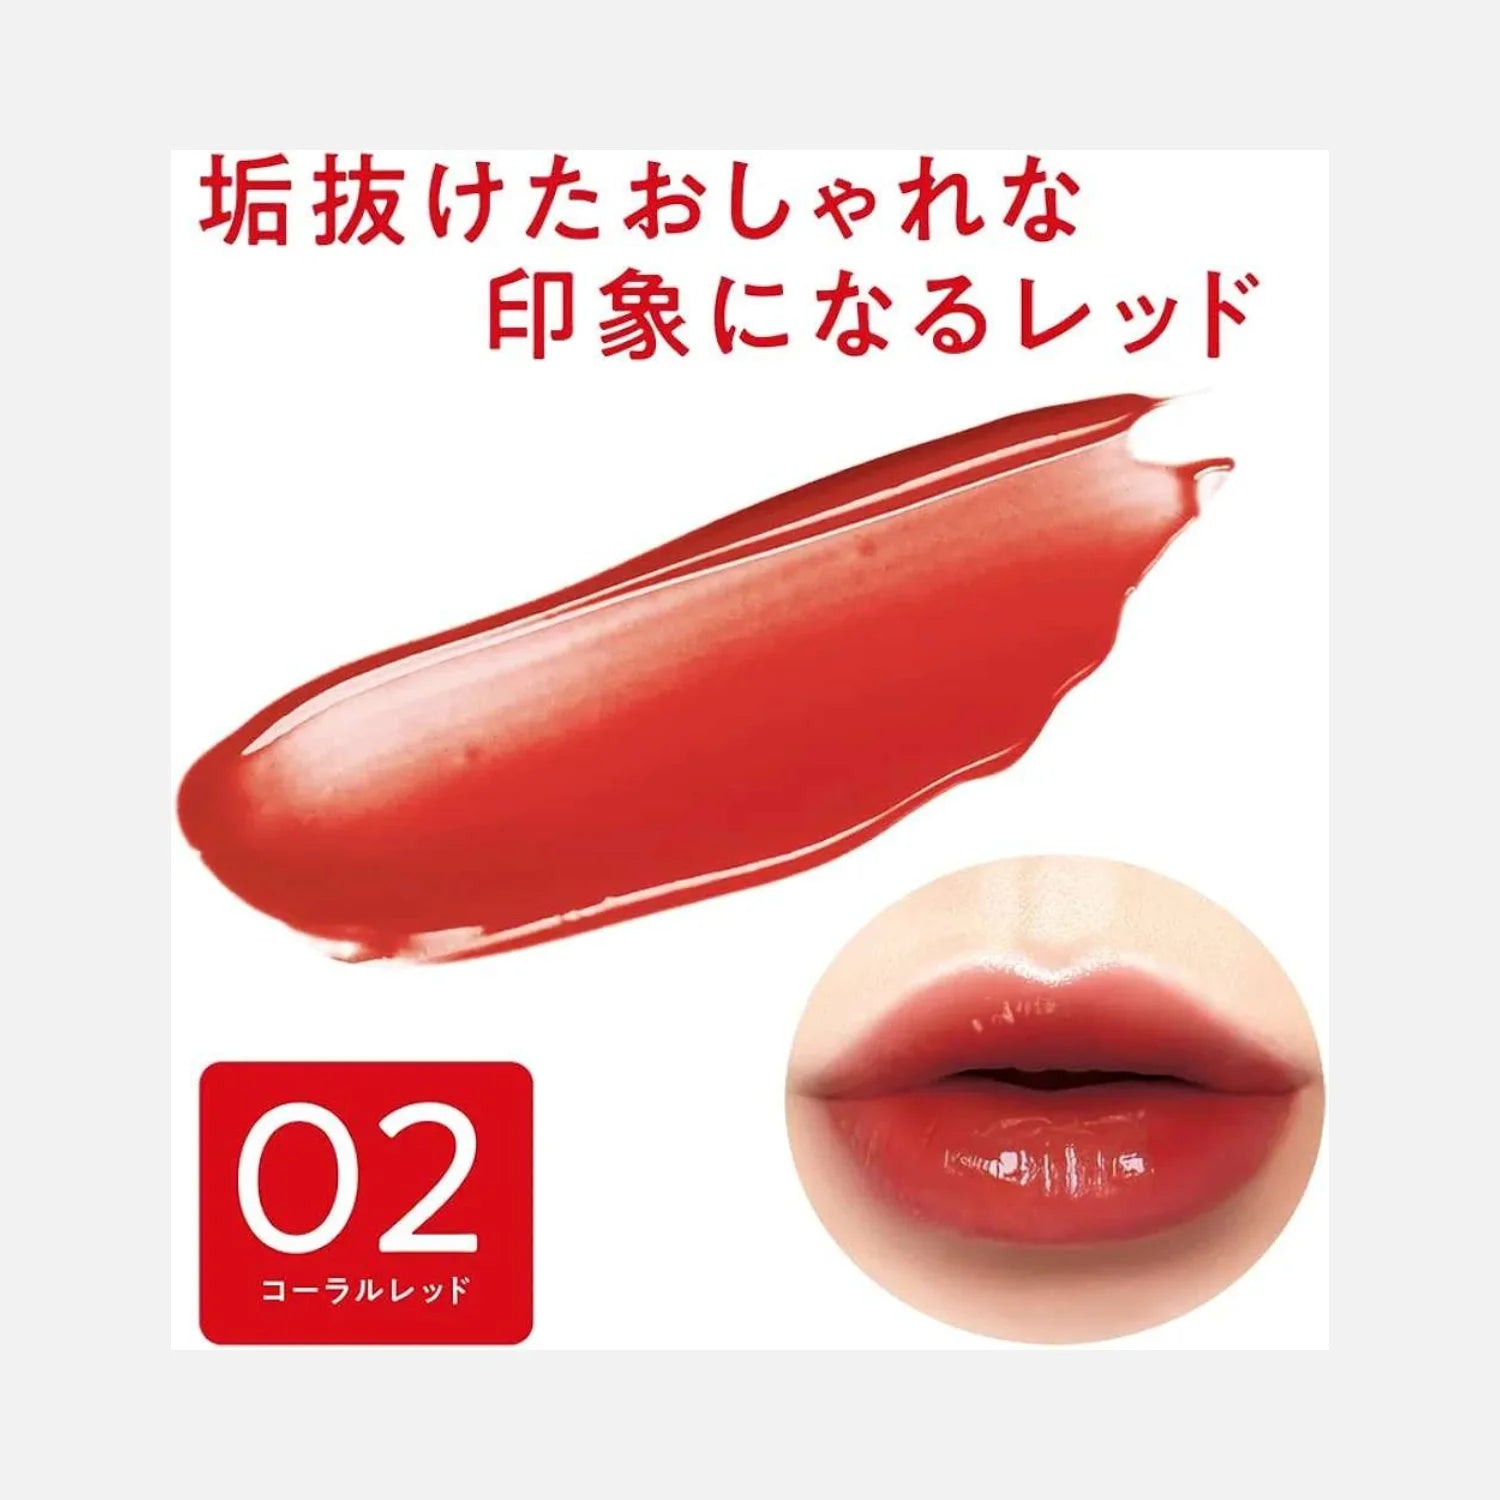 02 Coral Red